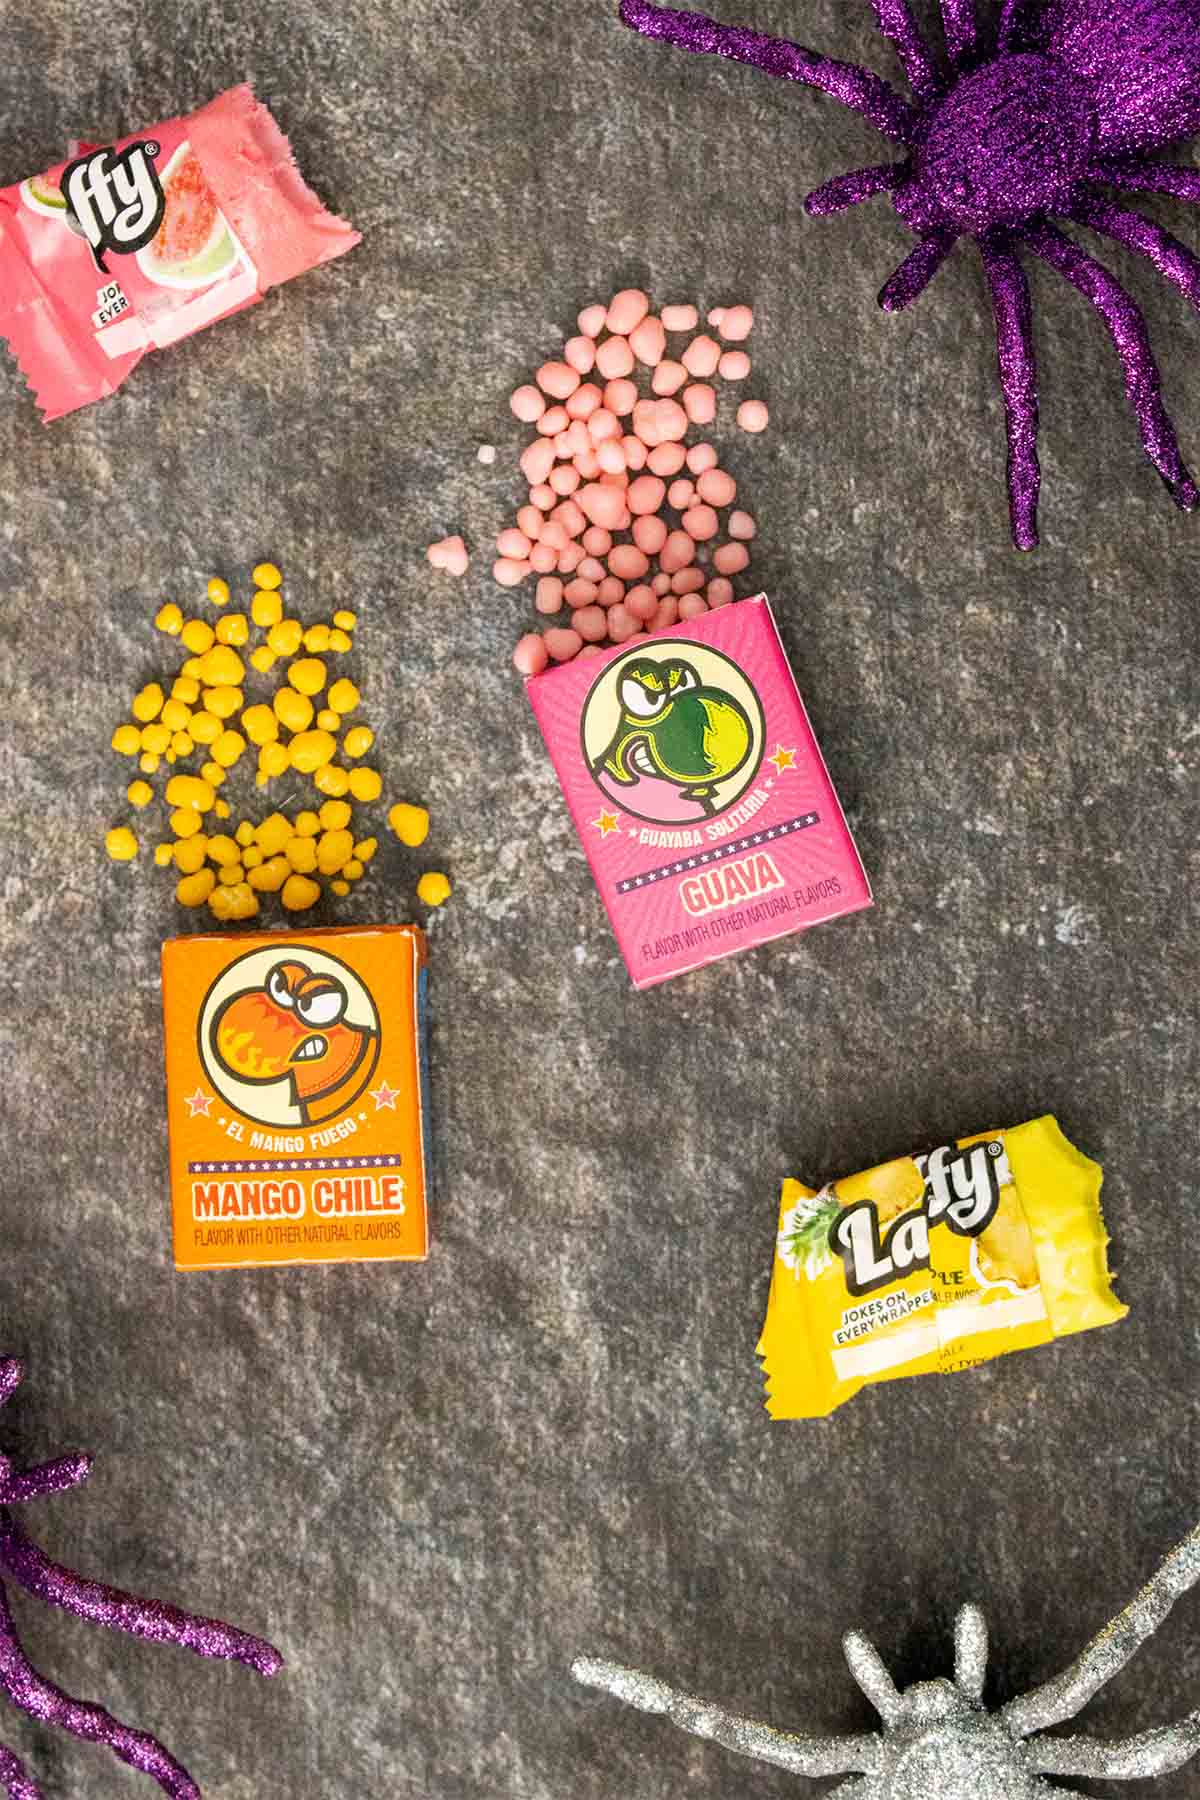 Nerds candy and Laffy Taffy on a table with some of the Nerds spilling out